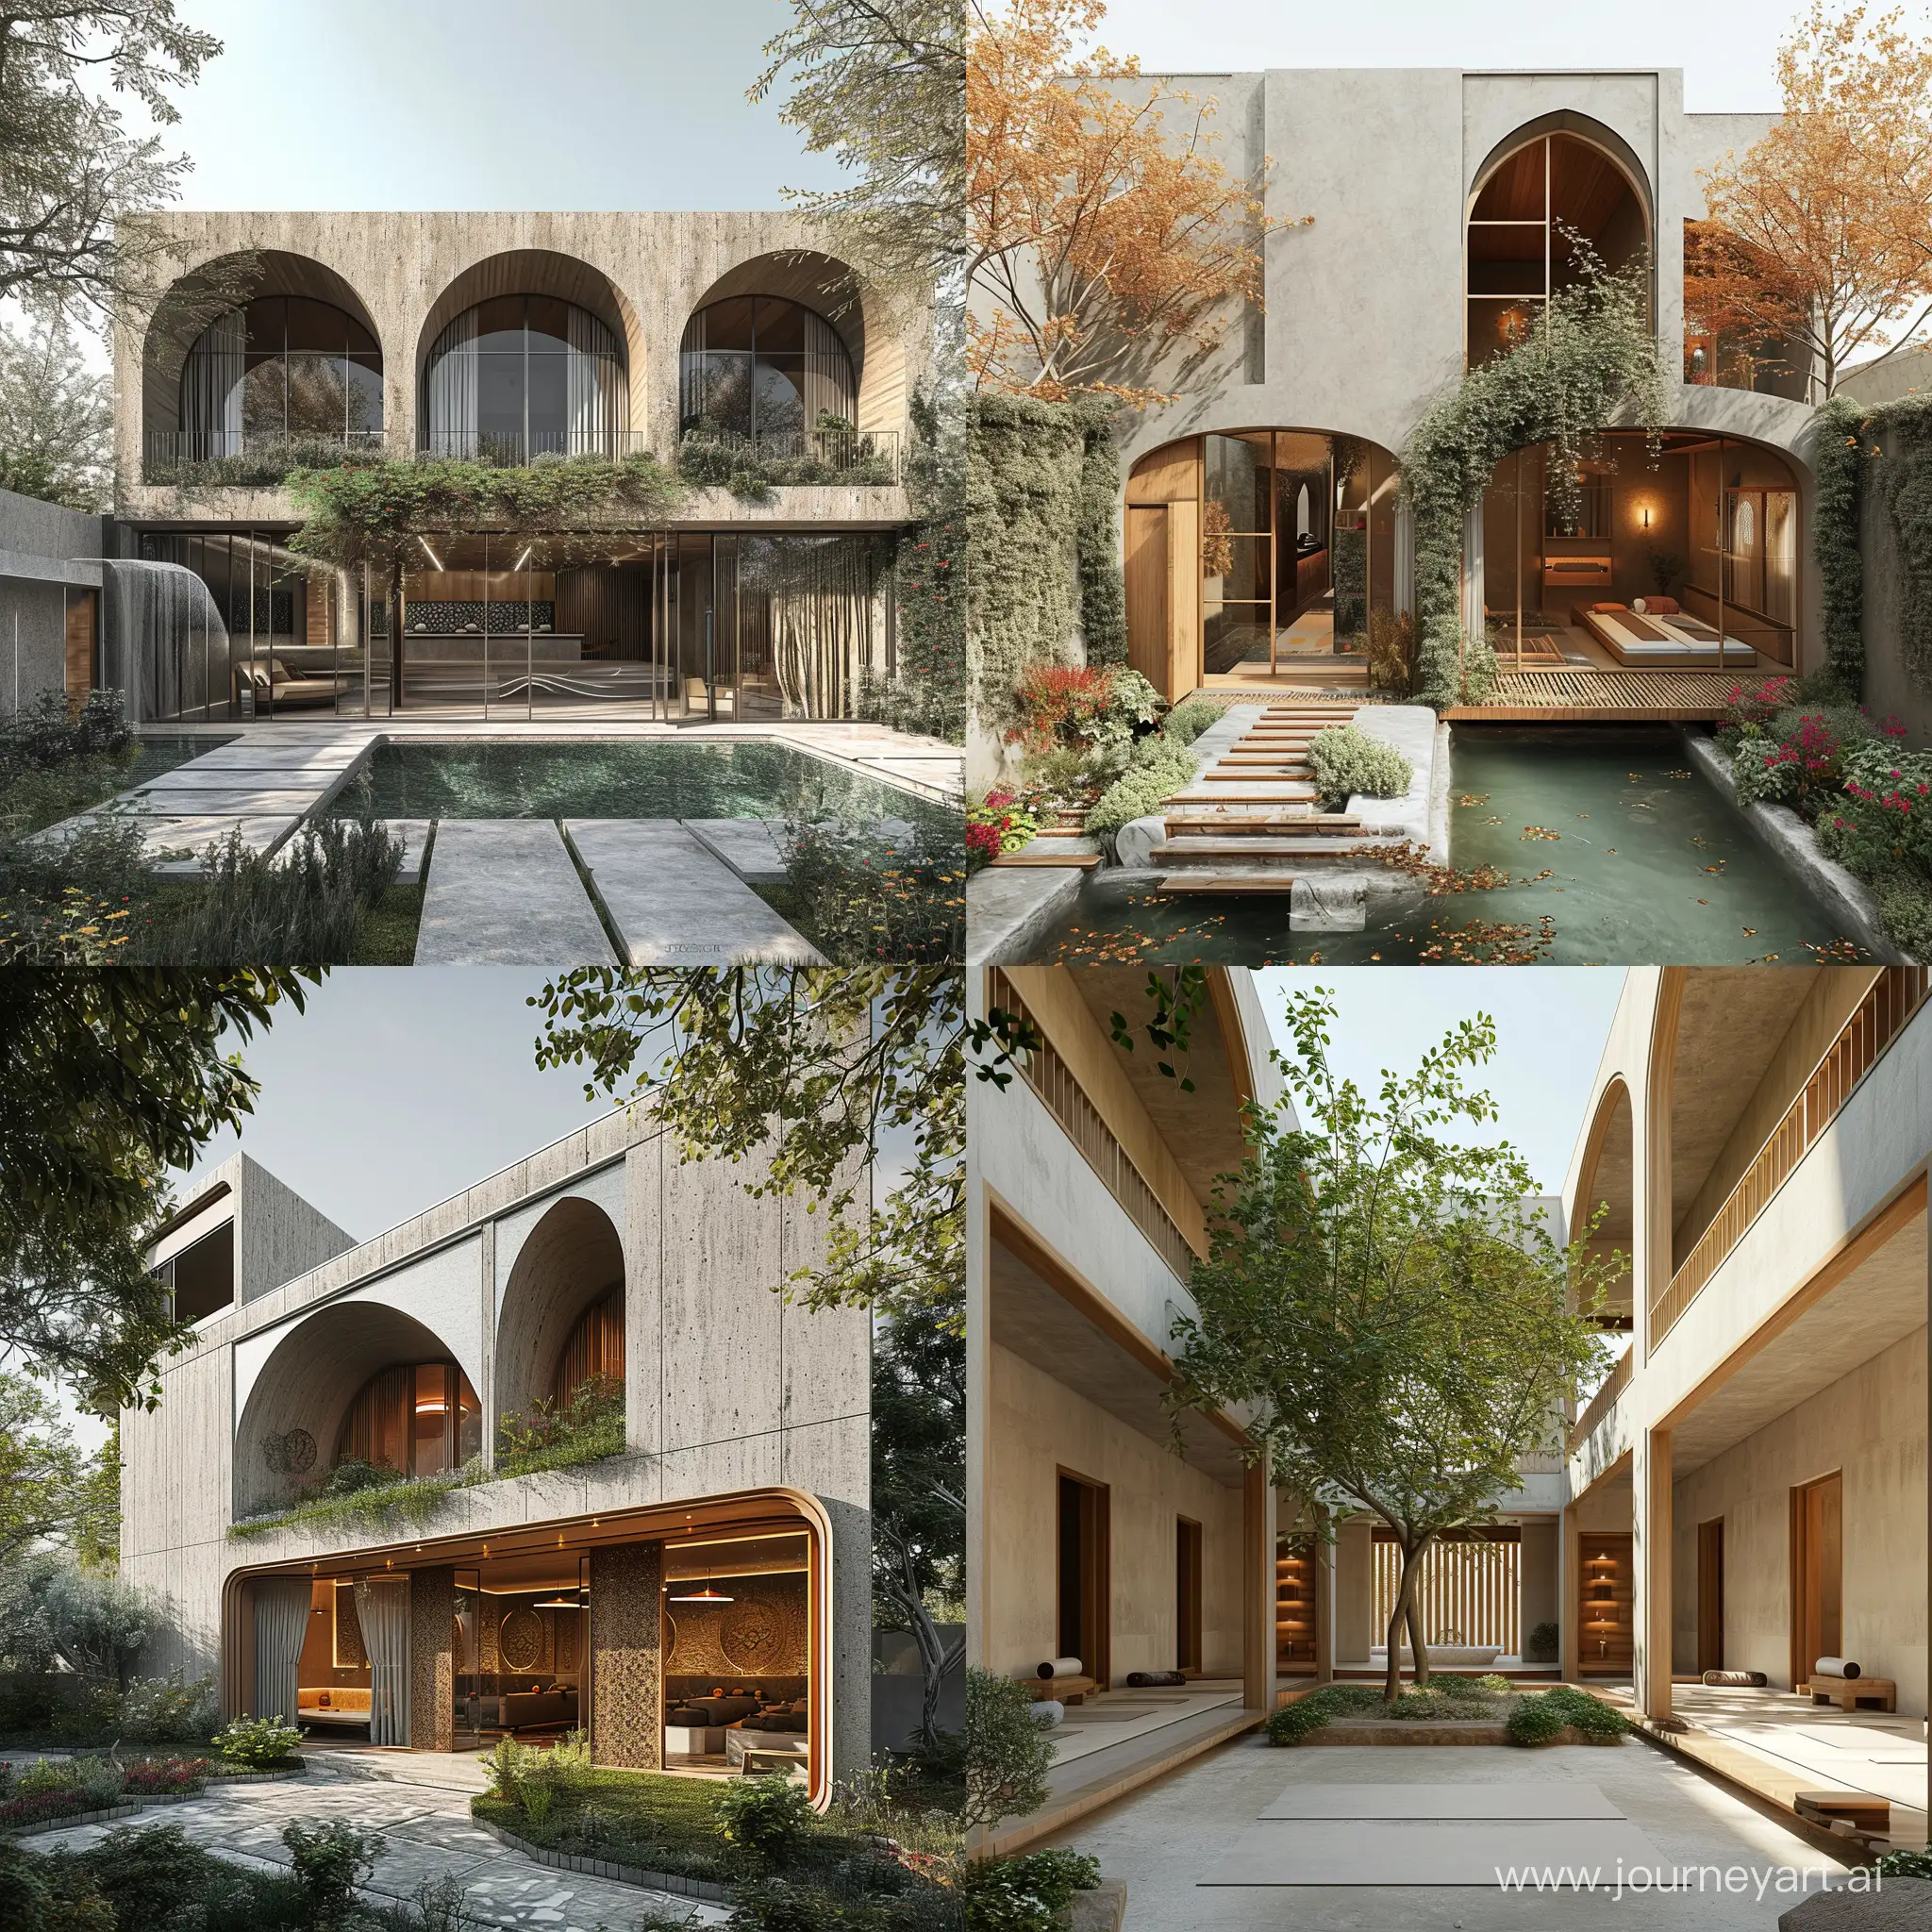 Designing a two-story spa and yoga center with a combination of an Iranian garden and an organic architectural approach in Iran